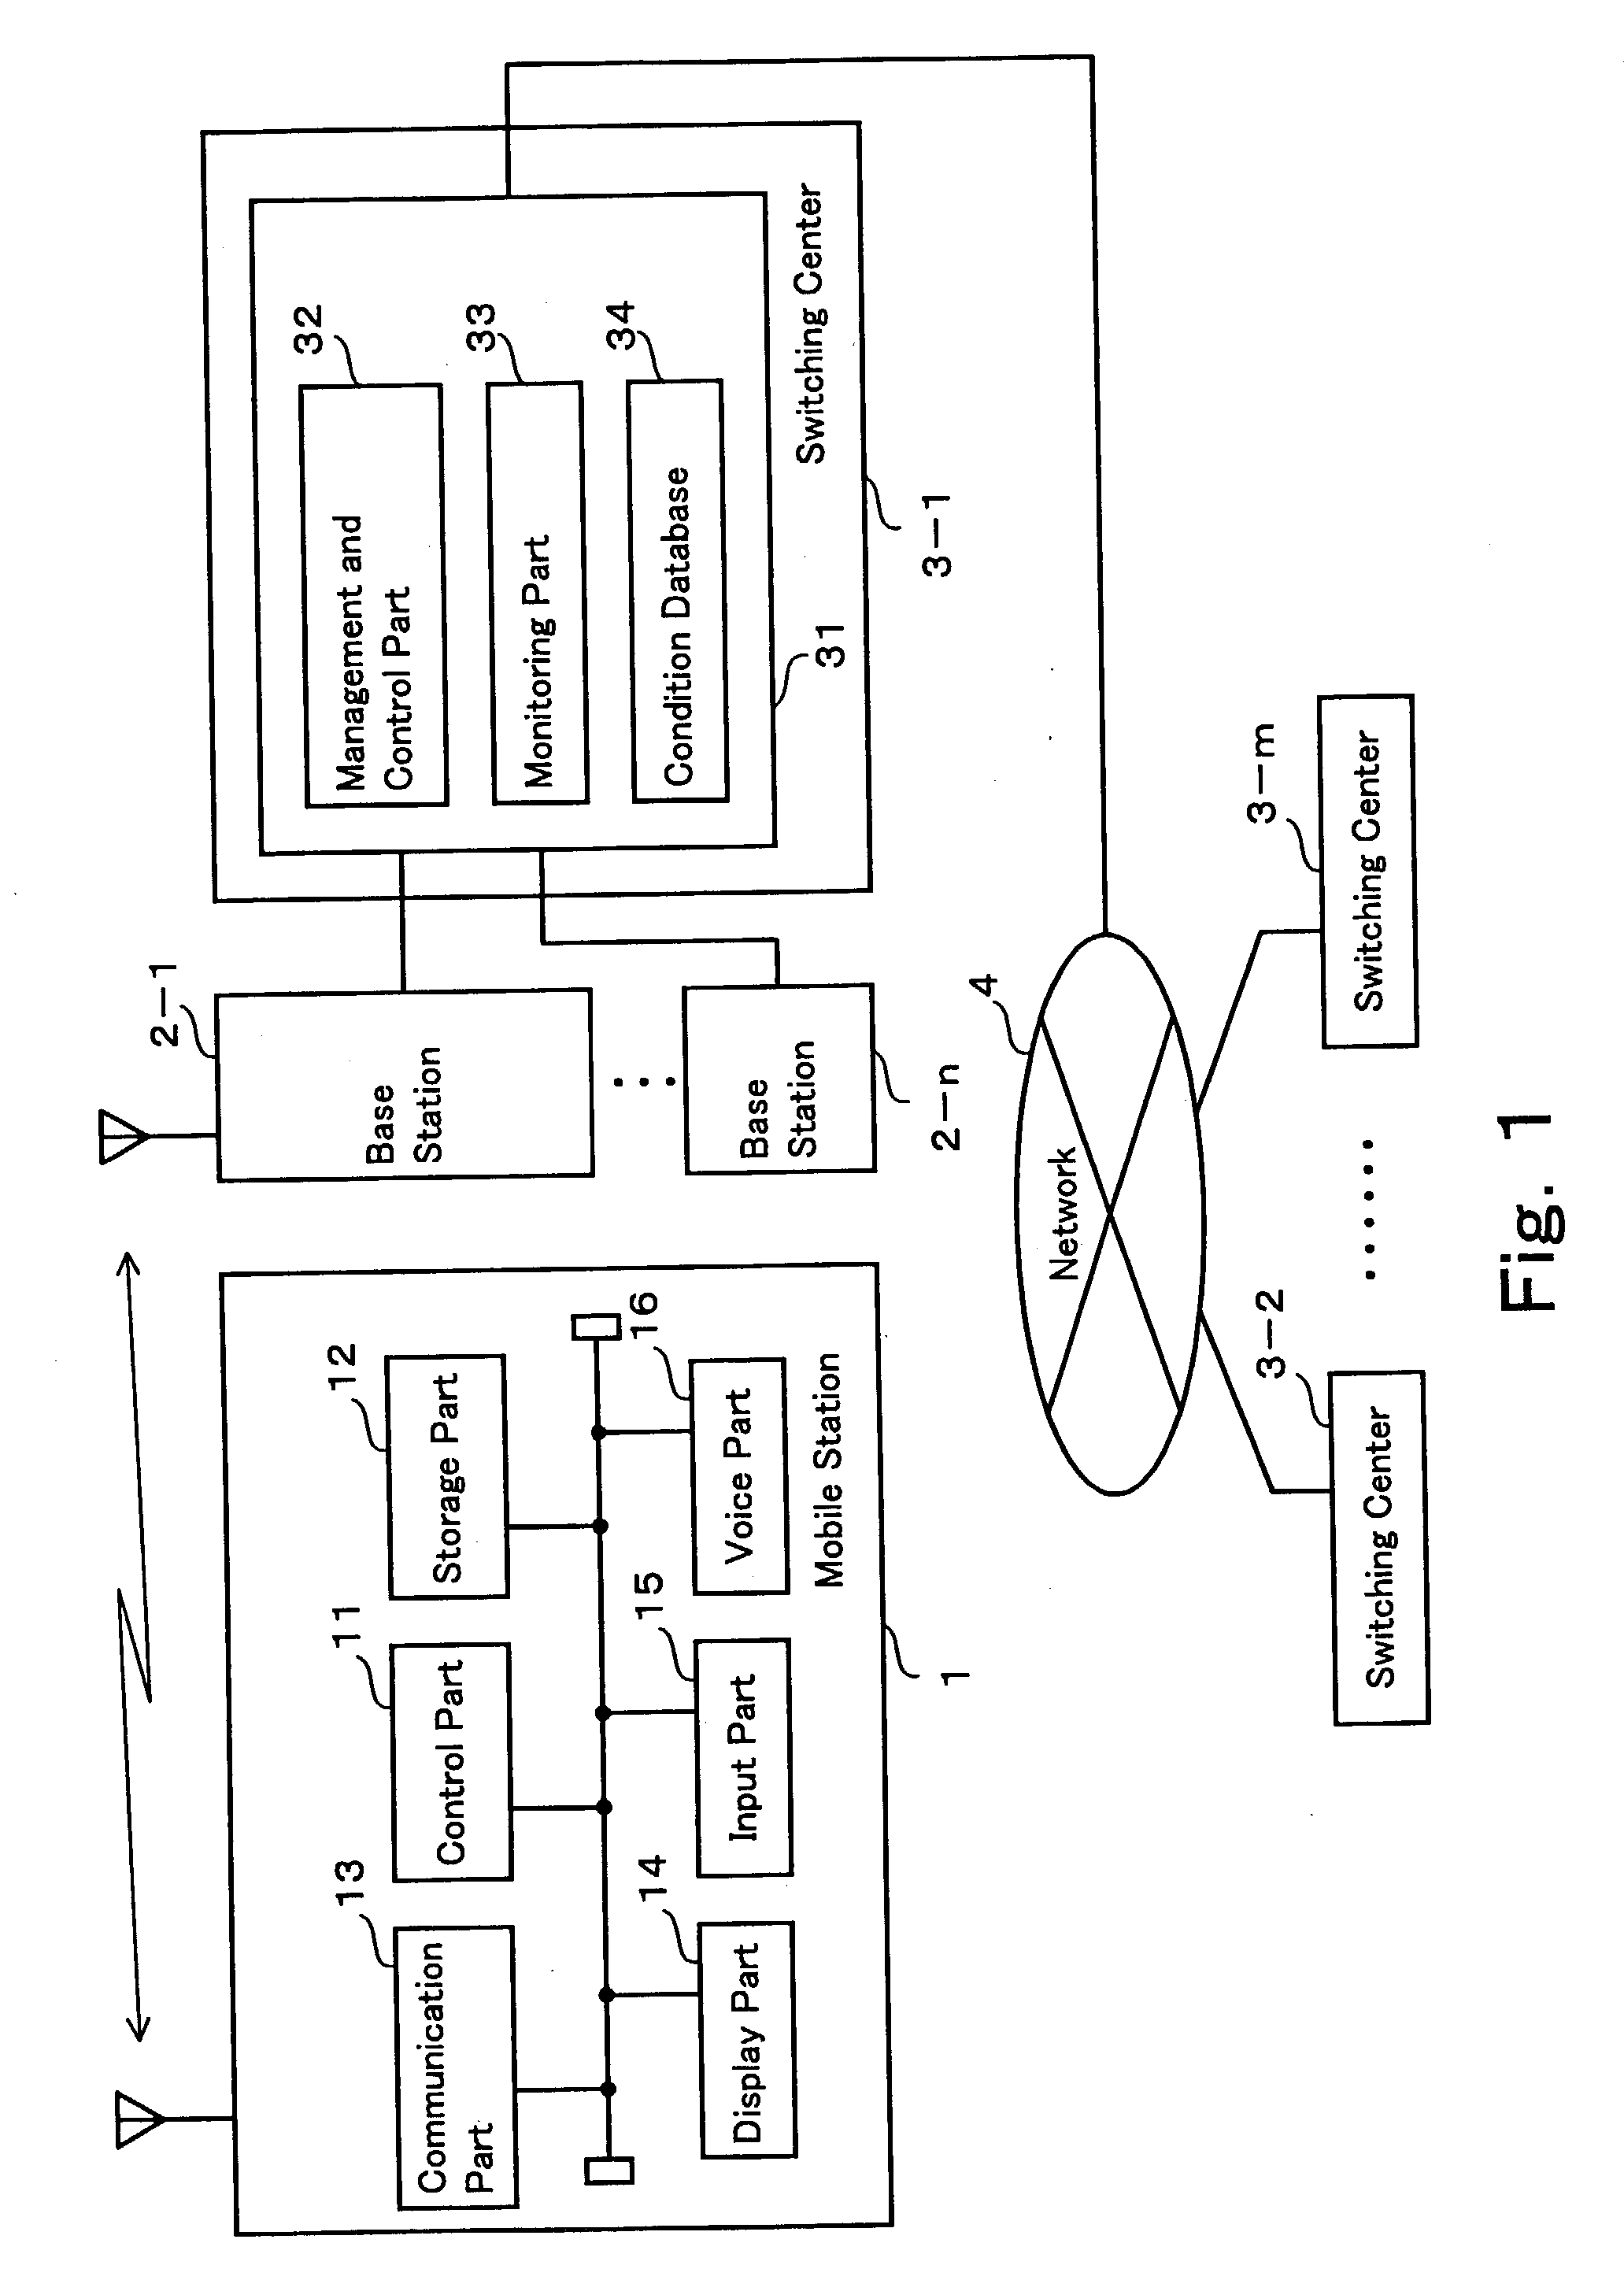 Mobile station, and apparatus, system and method for management of emergency calls